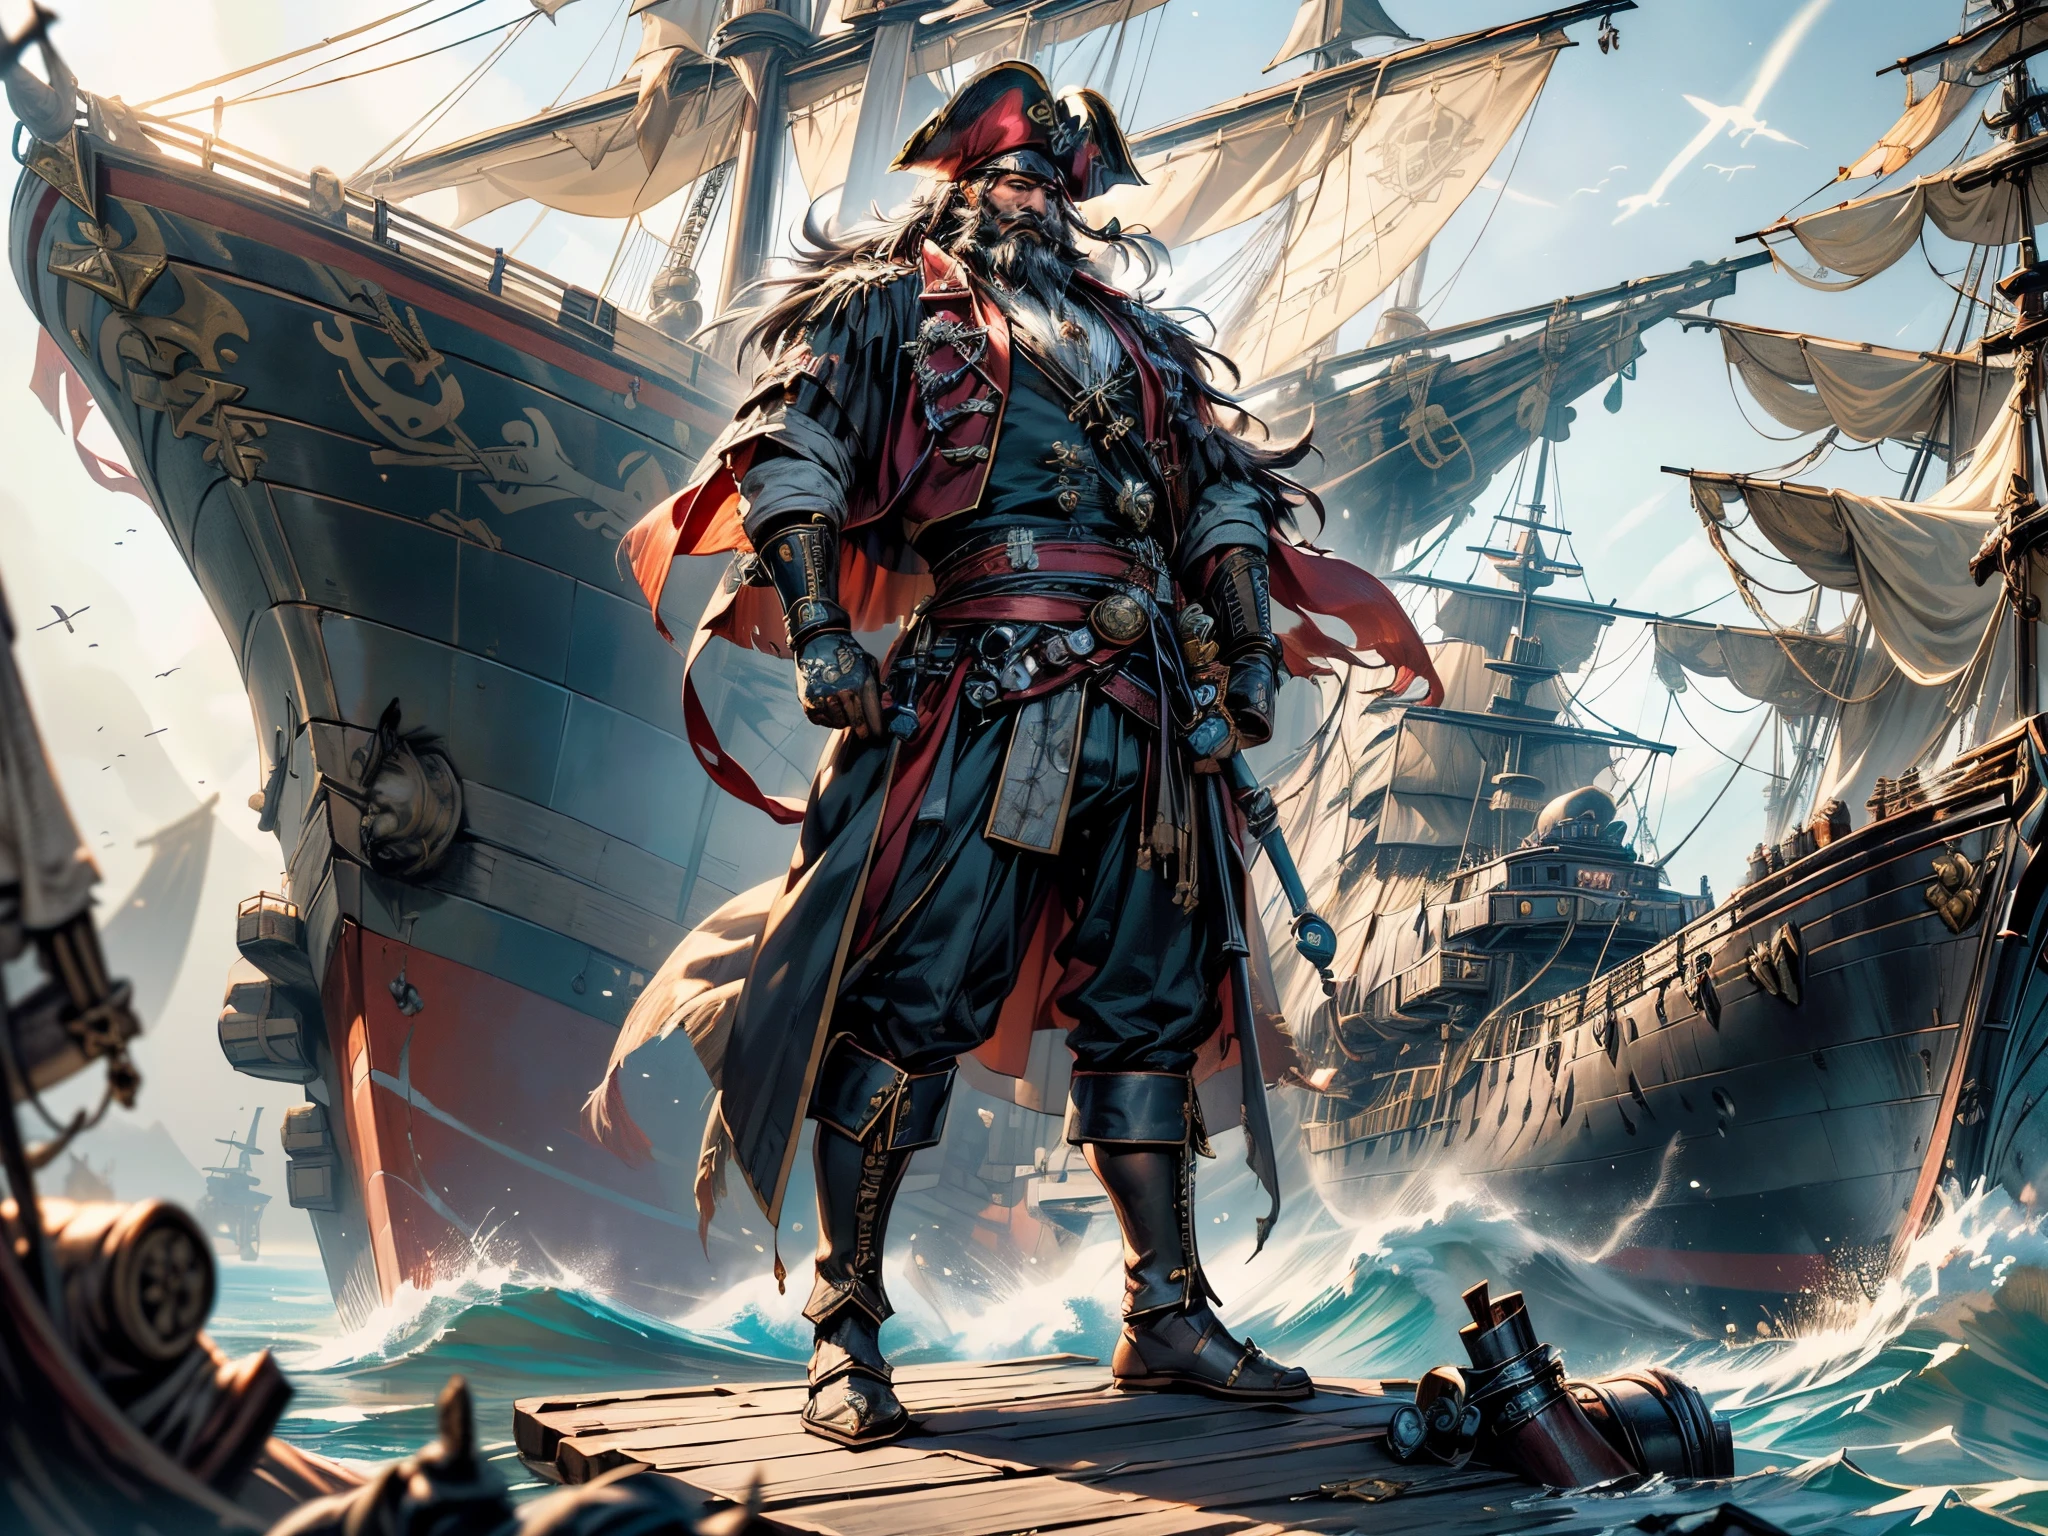 (Full body portrait of a exalted pirate king shipwrecked hungry for revange, holding a saber, his gargantuan warship in the background, larger than life, old pirate with a thick scruffy beard and wrinkled face, a great duelist and spellcaster:1.3) (Piratepunk, pirate lord, pirate king, pirate captain, angry man,) (Keelhaul, haul, pirate ship, massive broadside of ship,side half of massive ship, docked ship in background,) (blurry background of pirate crew, blurry details of pirate crew)